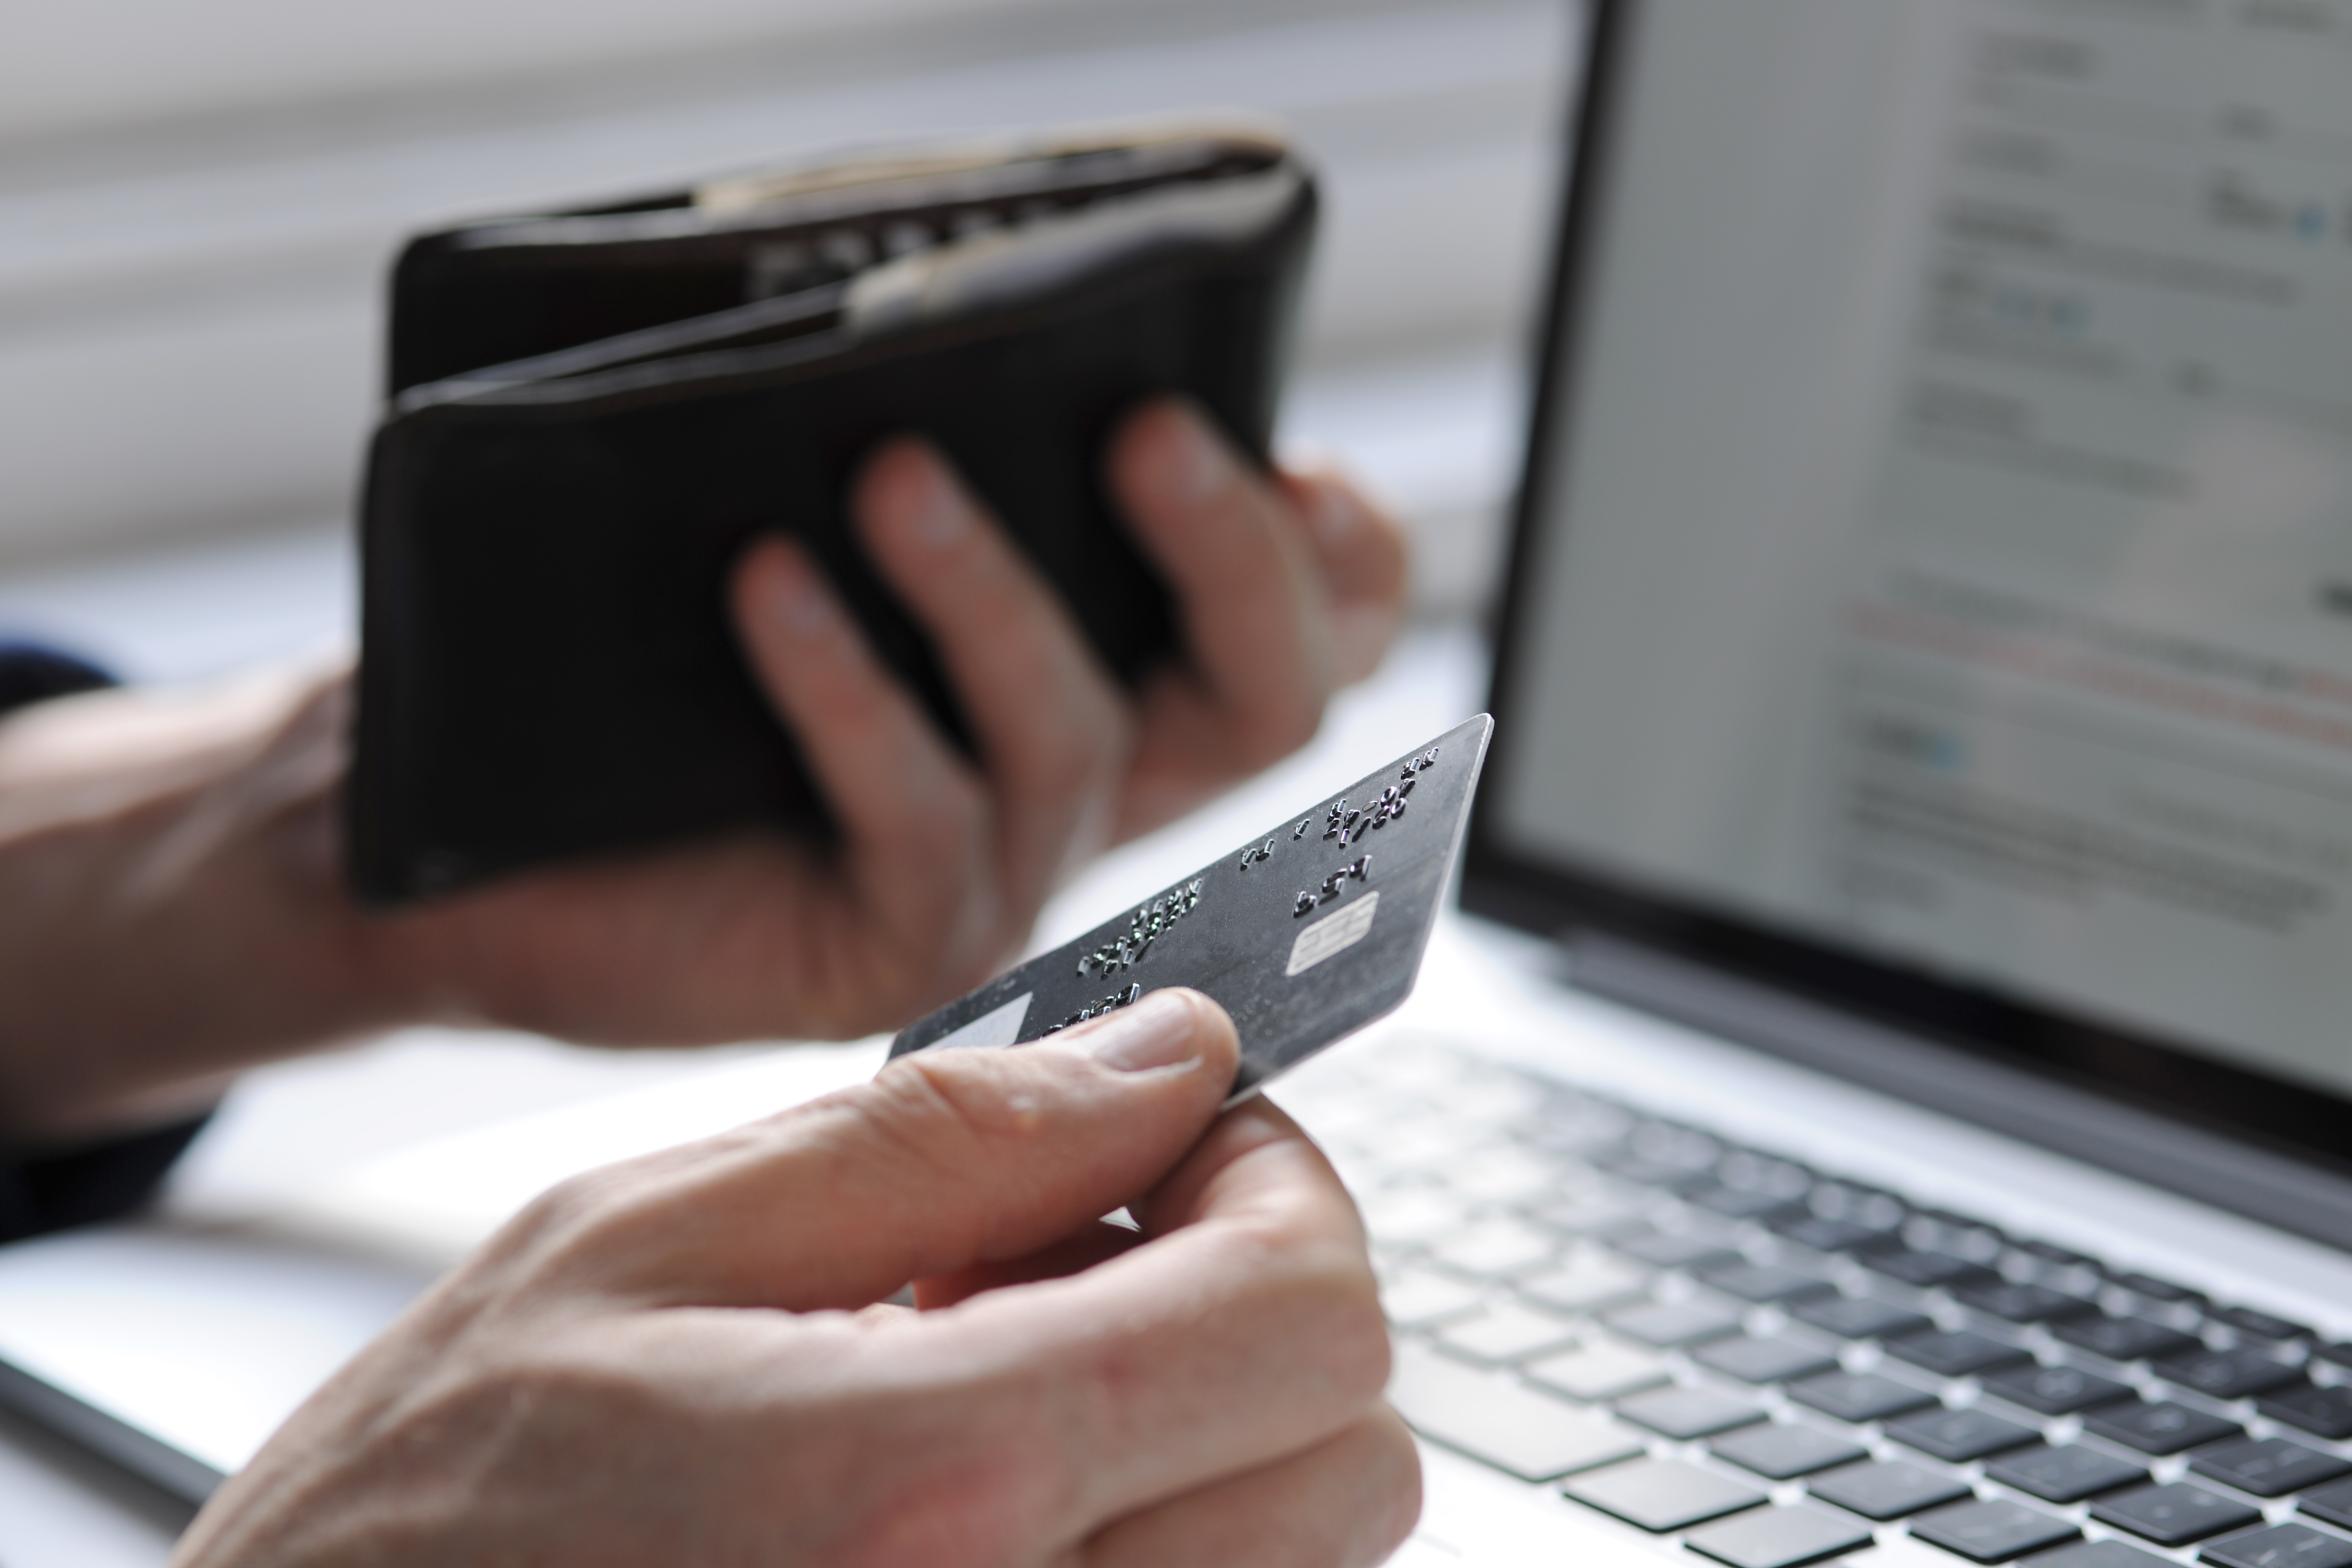 The Average U.S. Household Owes More than $16,000 in Credit Card Debt